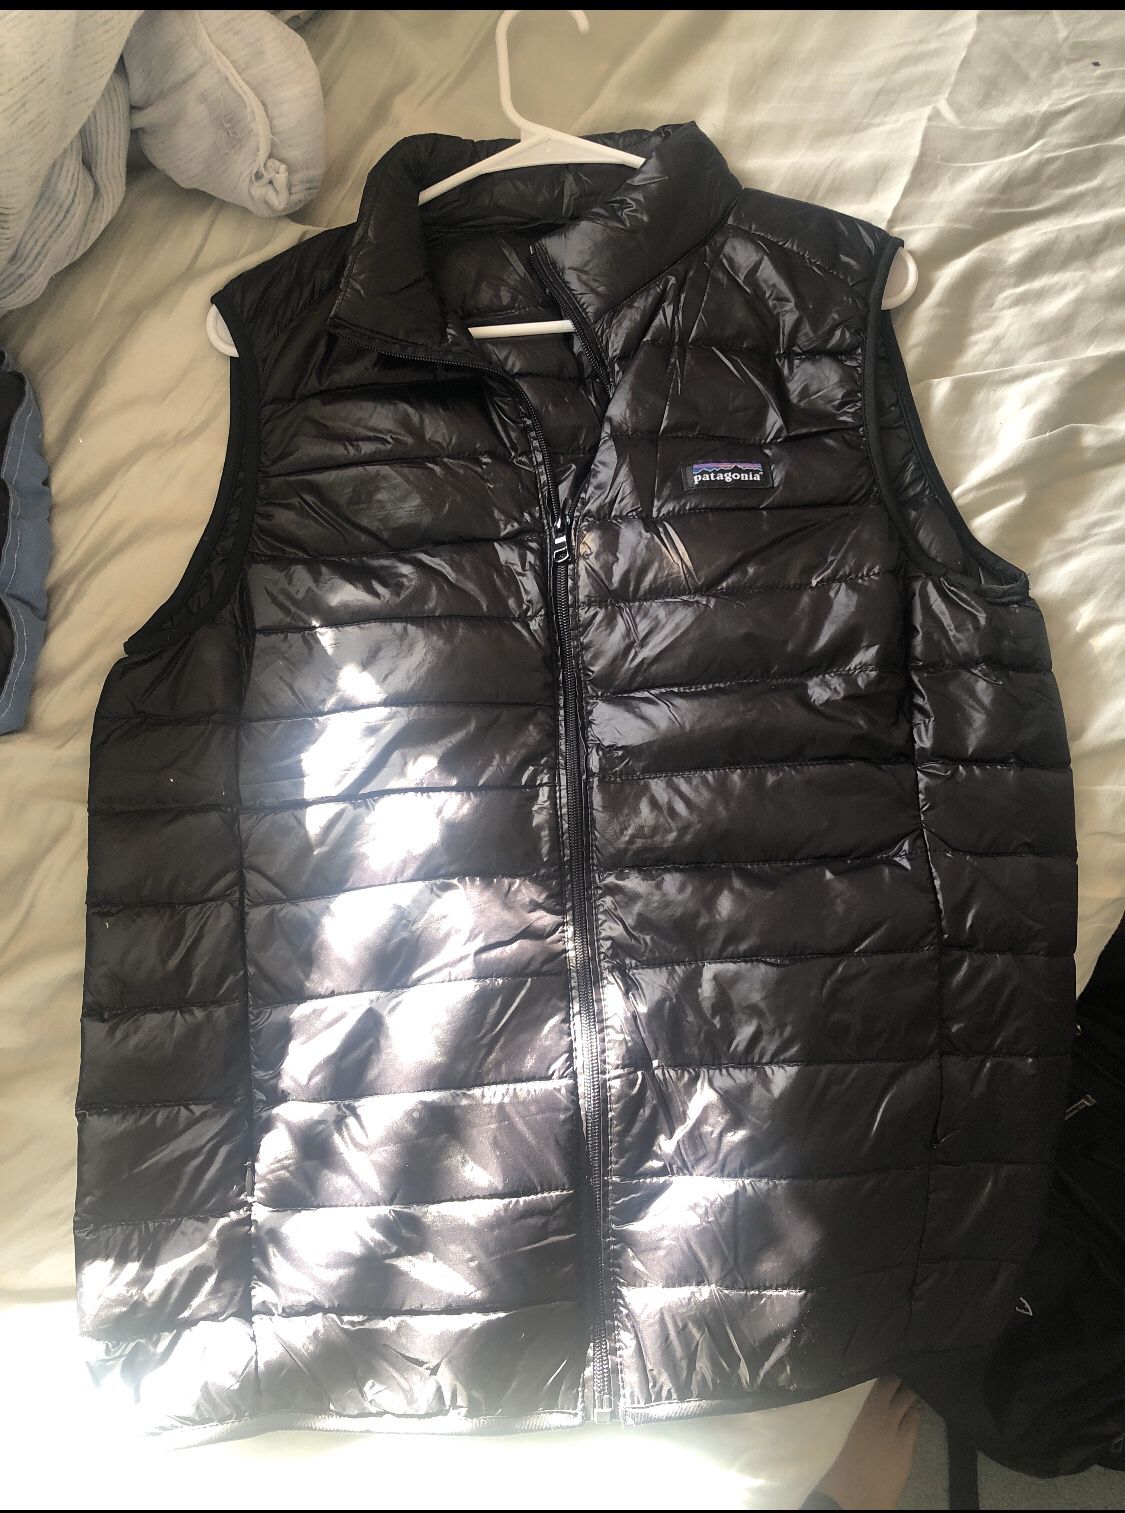 Patagonia vest size small